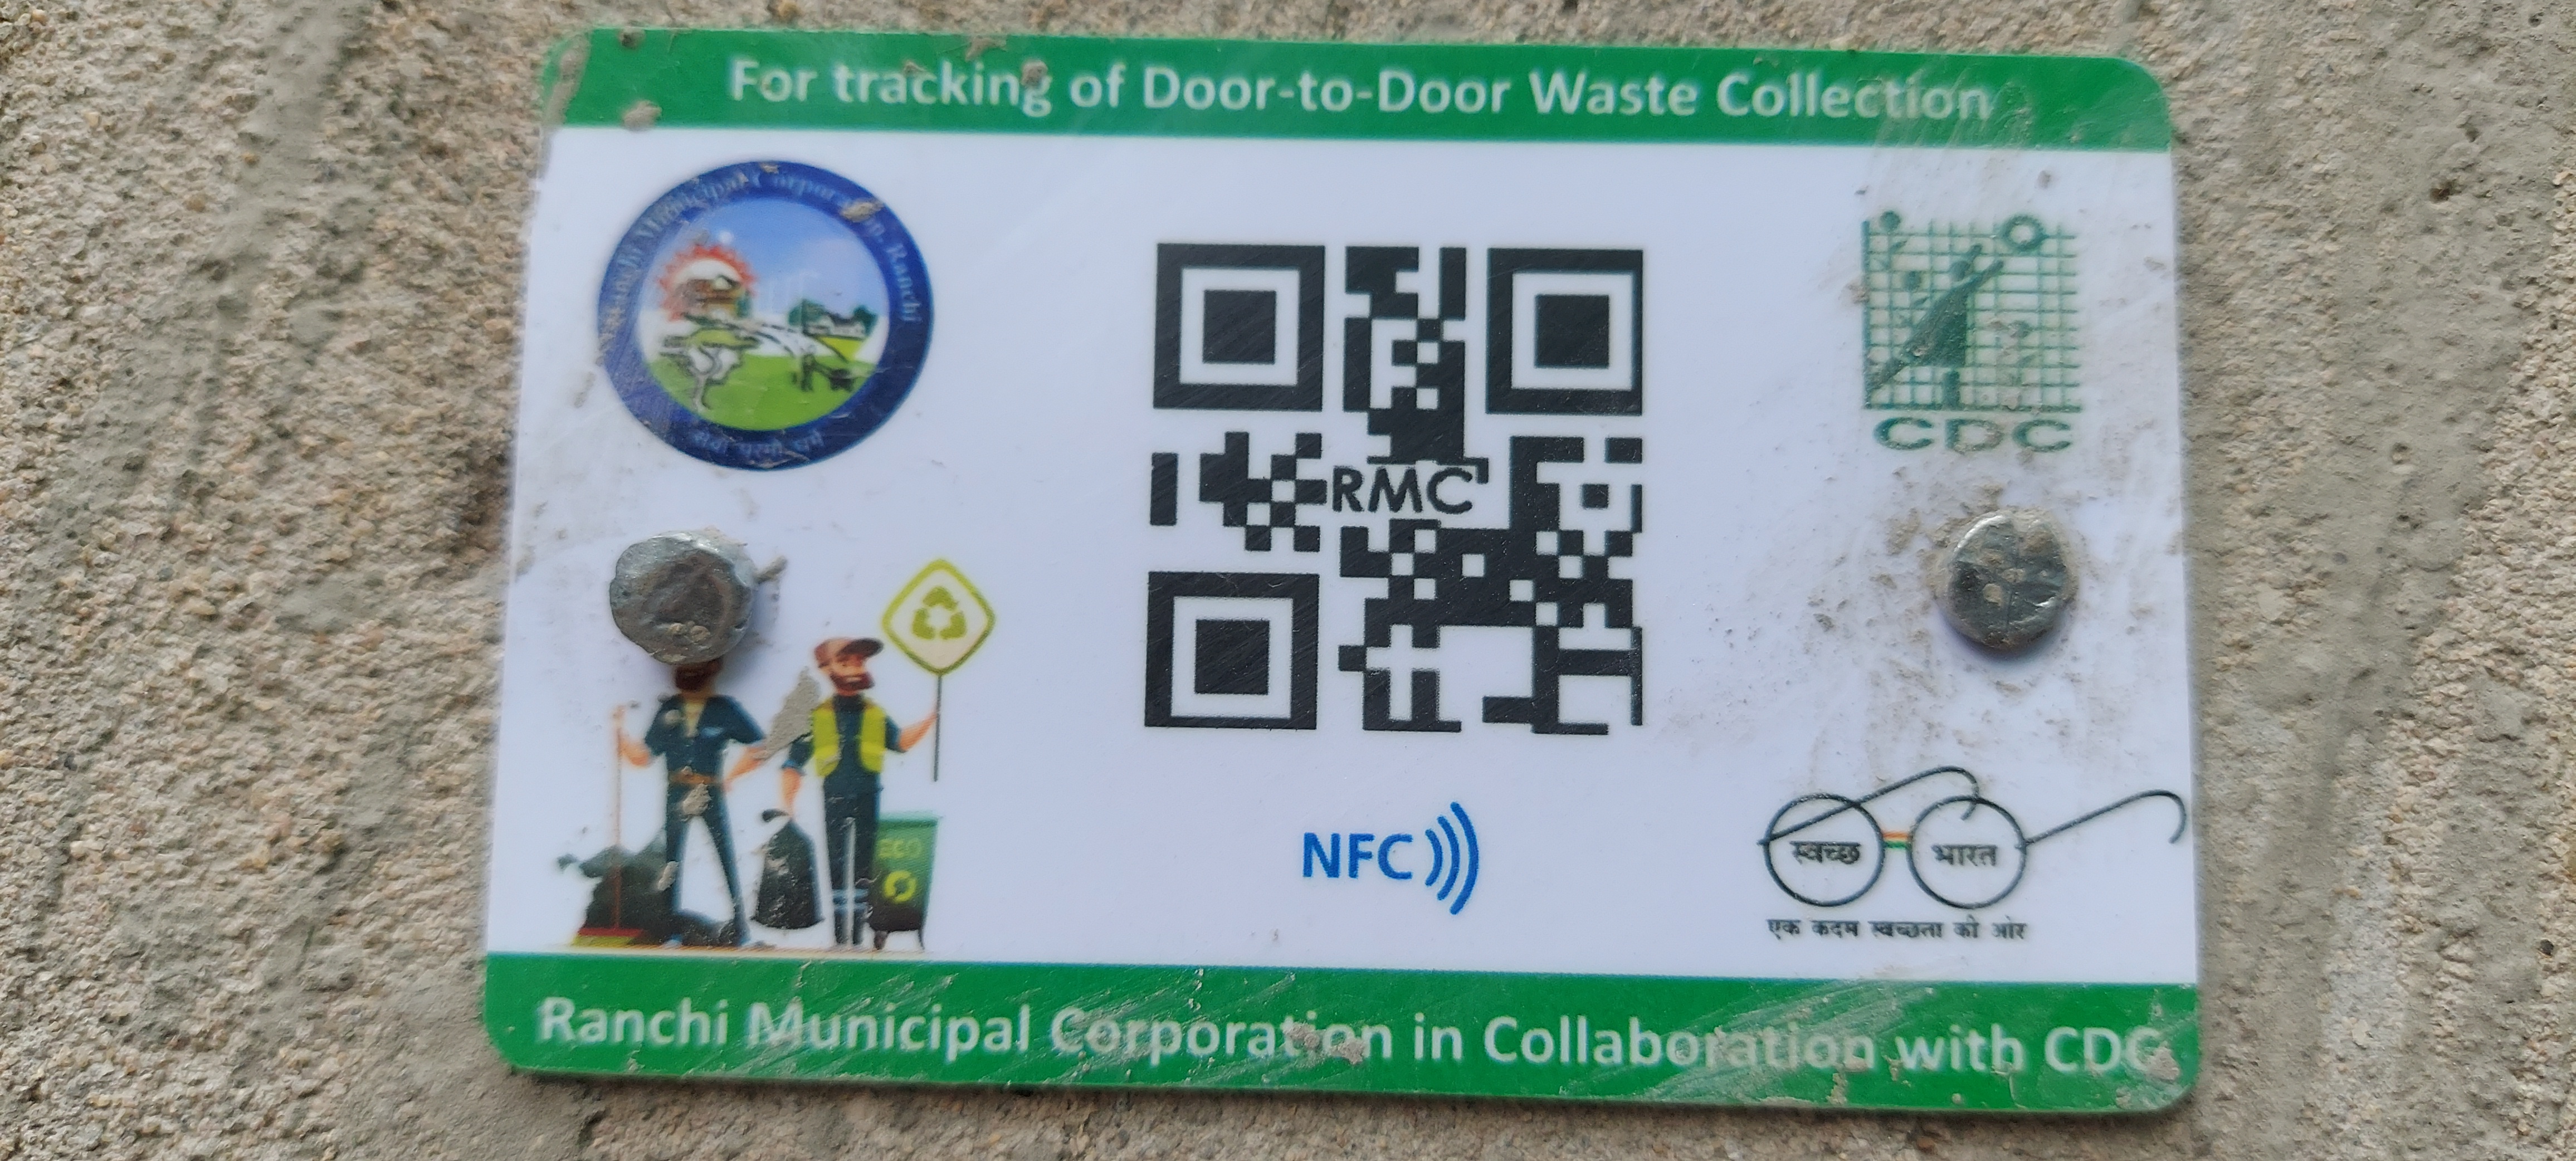 CDC put barcodes on houses Instead of RFID in RMC area,  company to be blacklist on violation of agreement